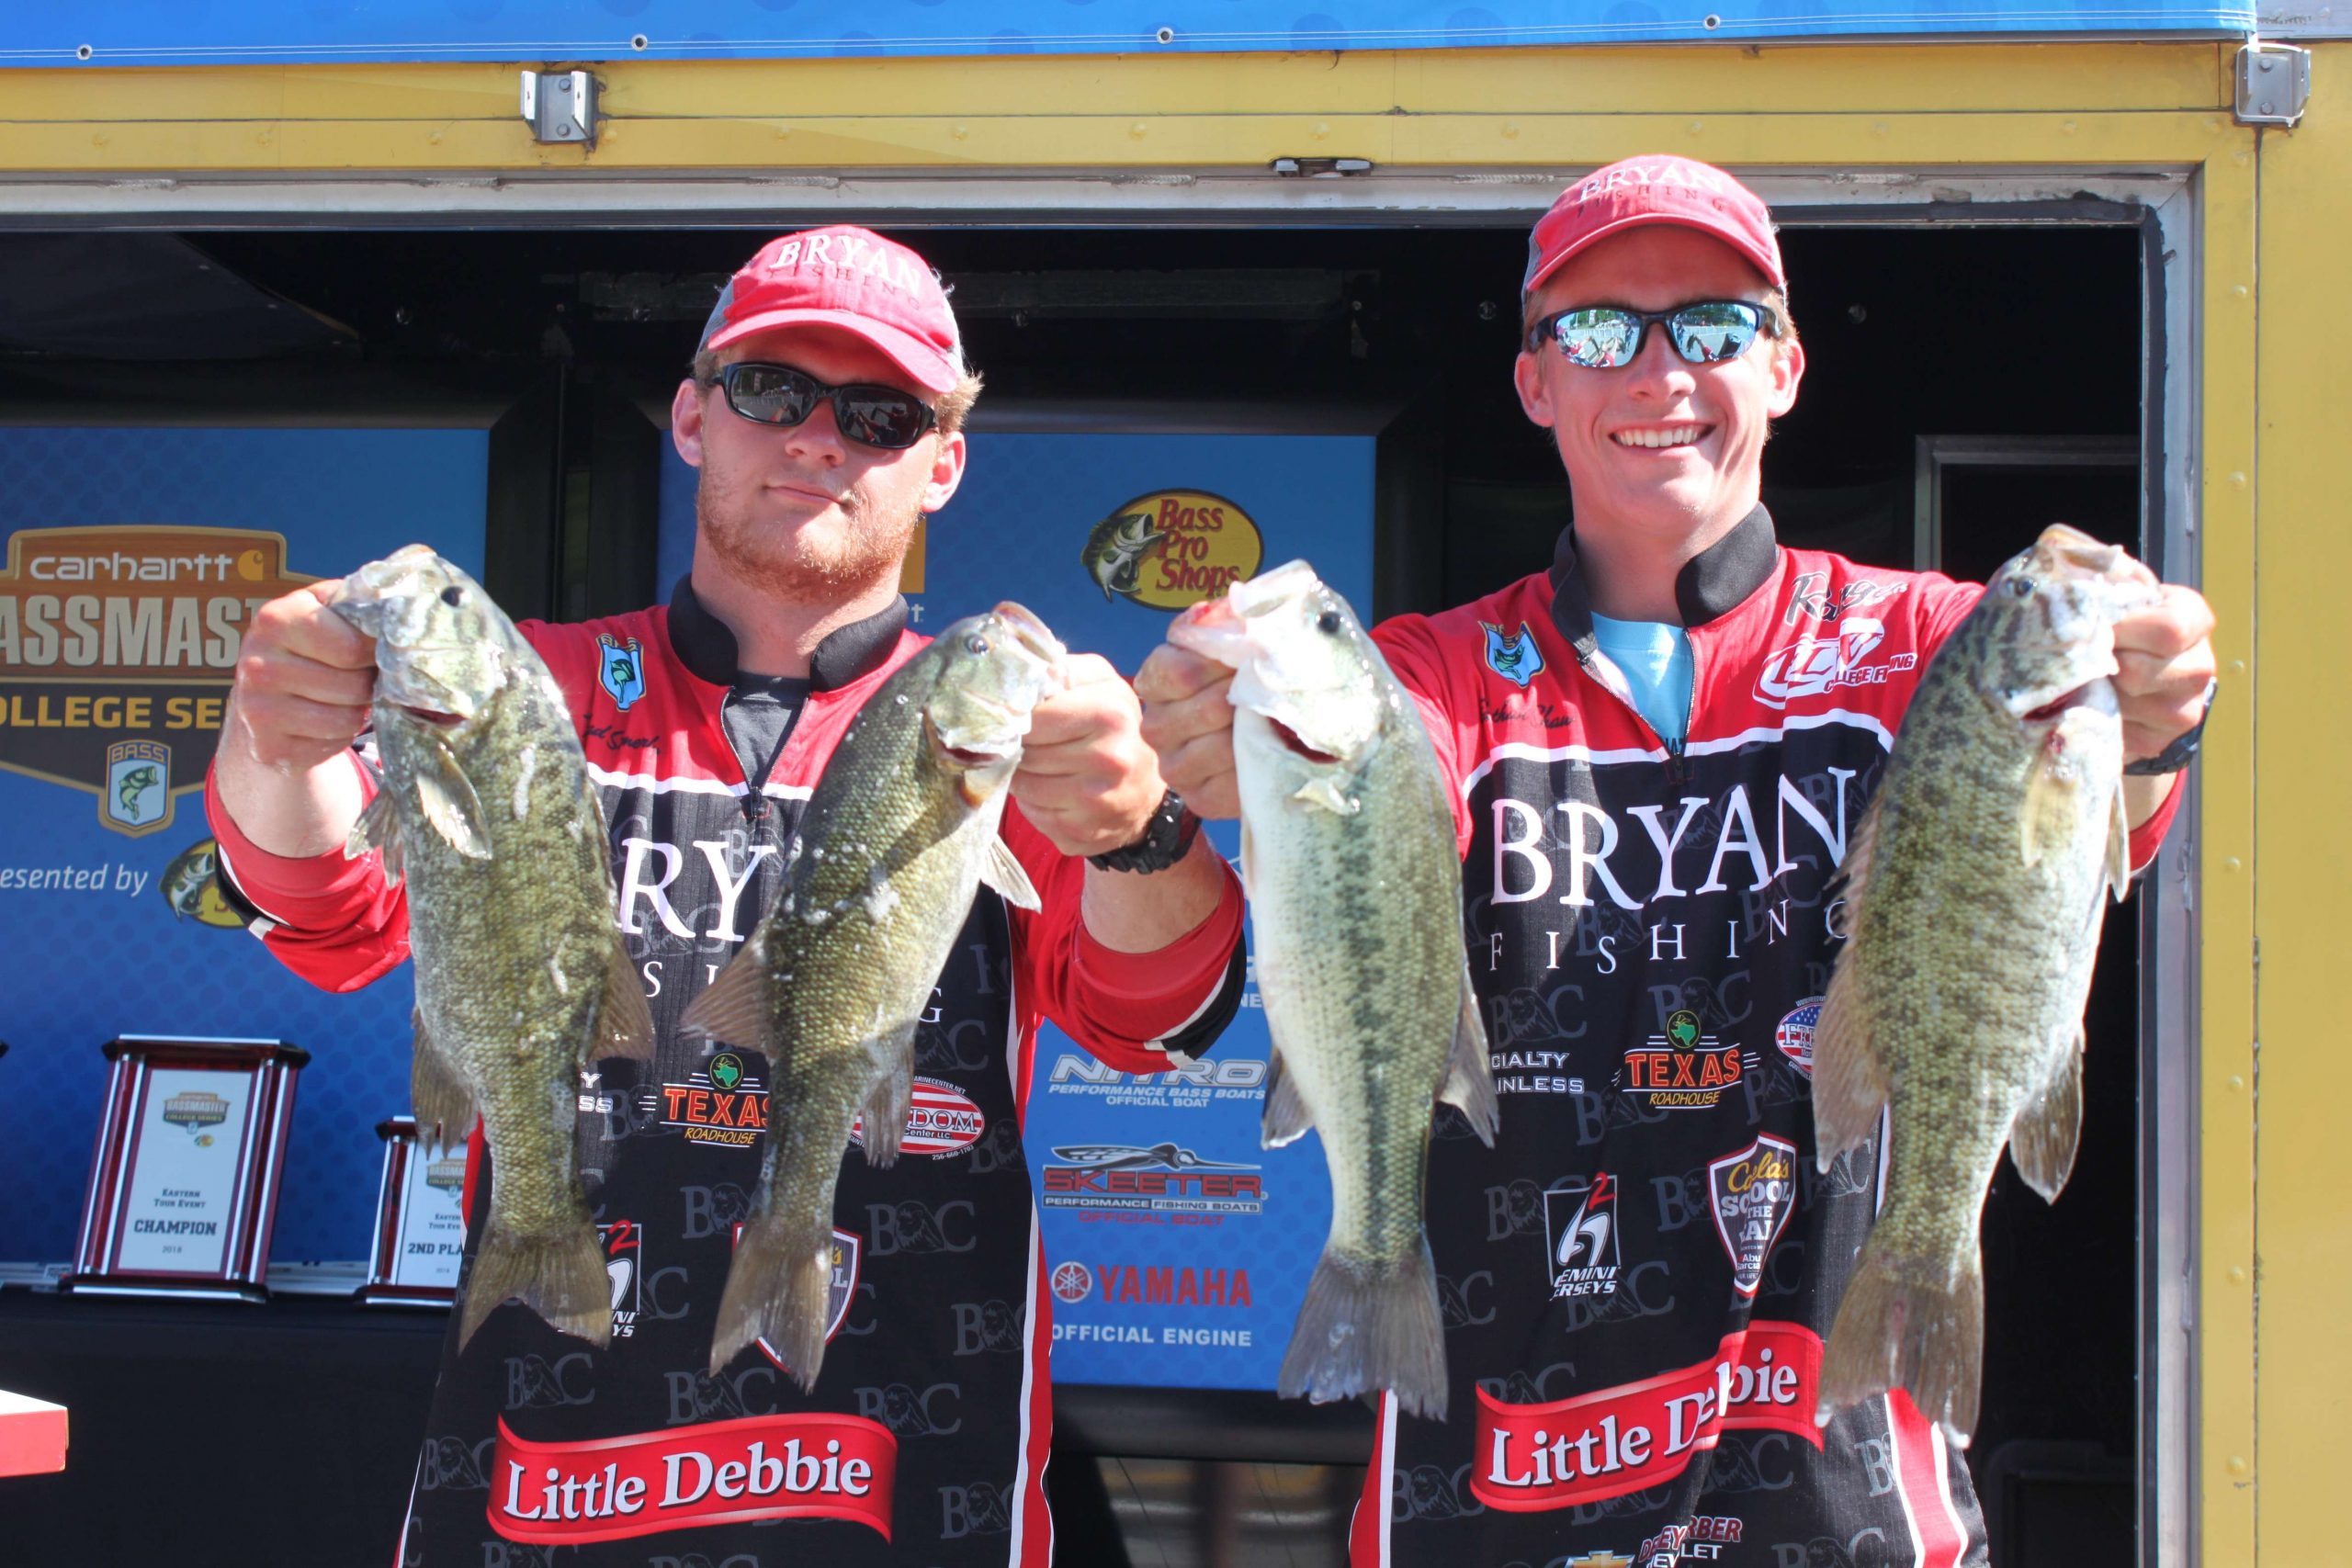 Thad Simerly and Ethan Shaw of Bryan College placed 19th with 35-11.